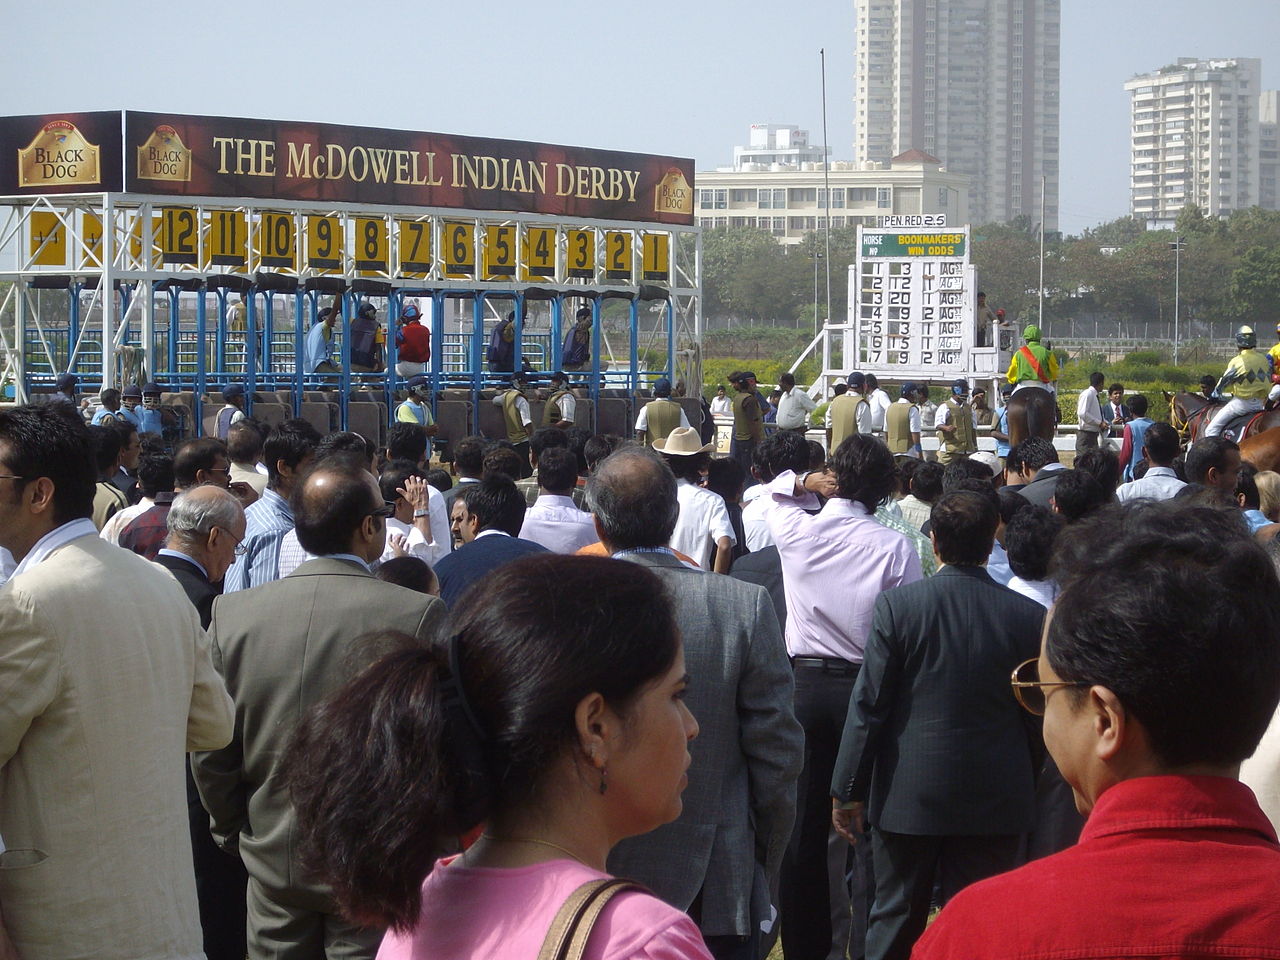 File:Starting gates and 'Bookmakers Odds'.JPG - Wikimedia Commons